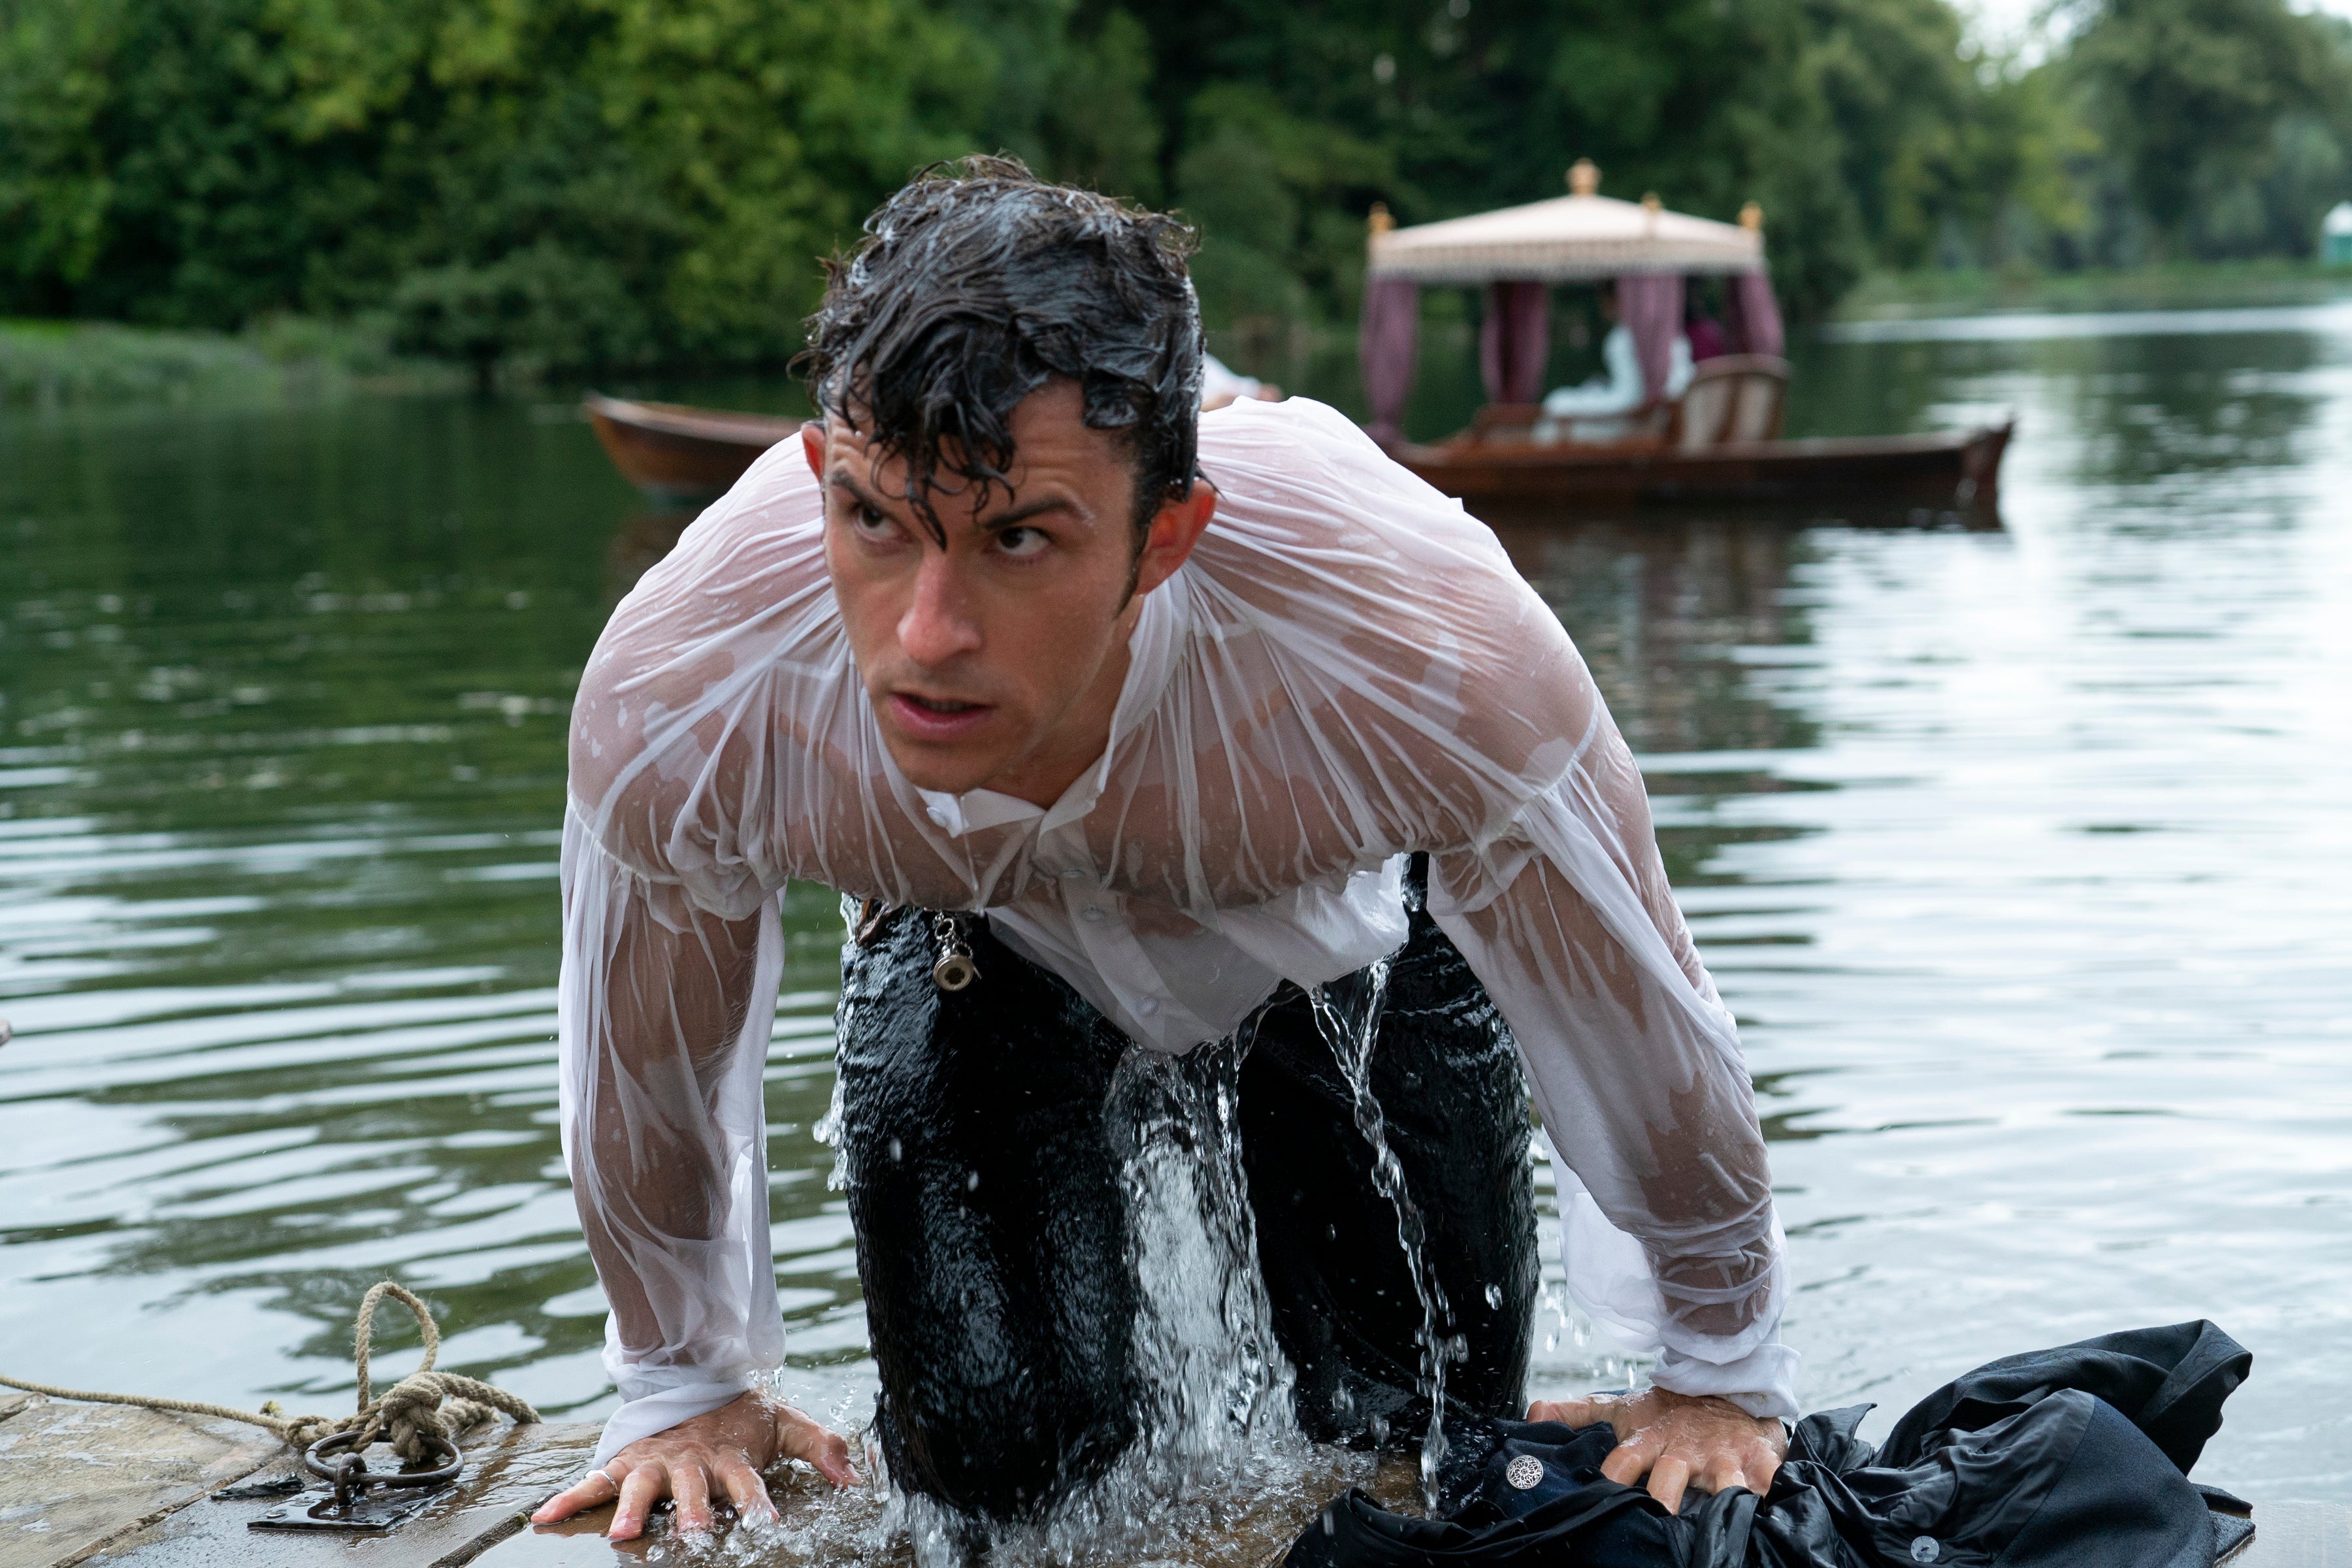 Jonathan Bailey emerges from a lake, his soaked hair and clothes plastered to his body.